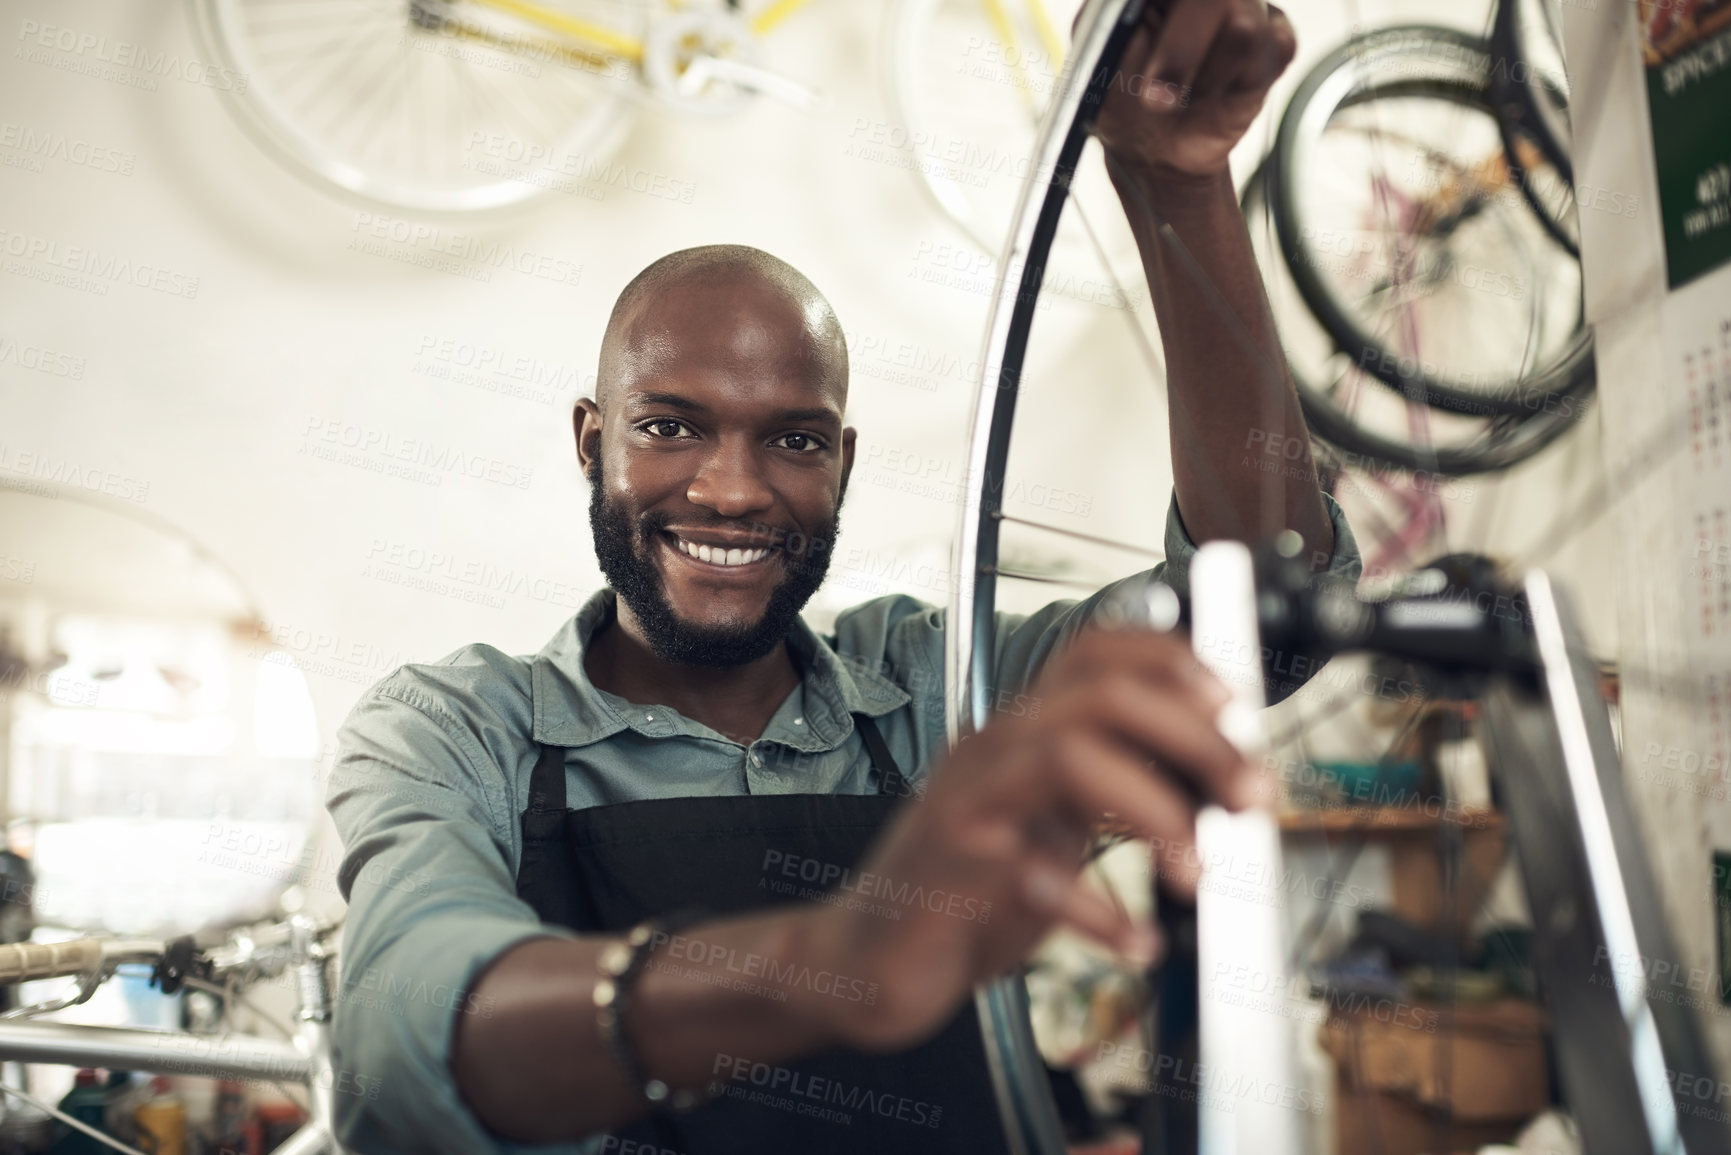 Buy stock photo Shot of a handsome young man standing alone in his shop and repairing a bicycle wheel